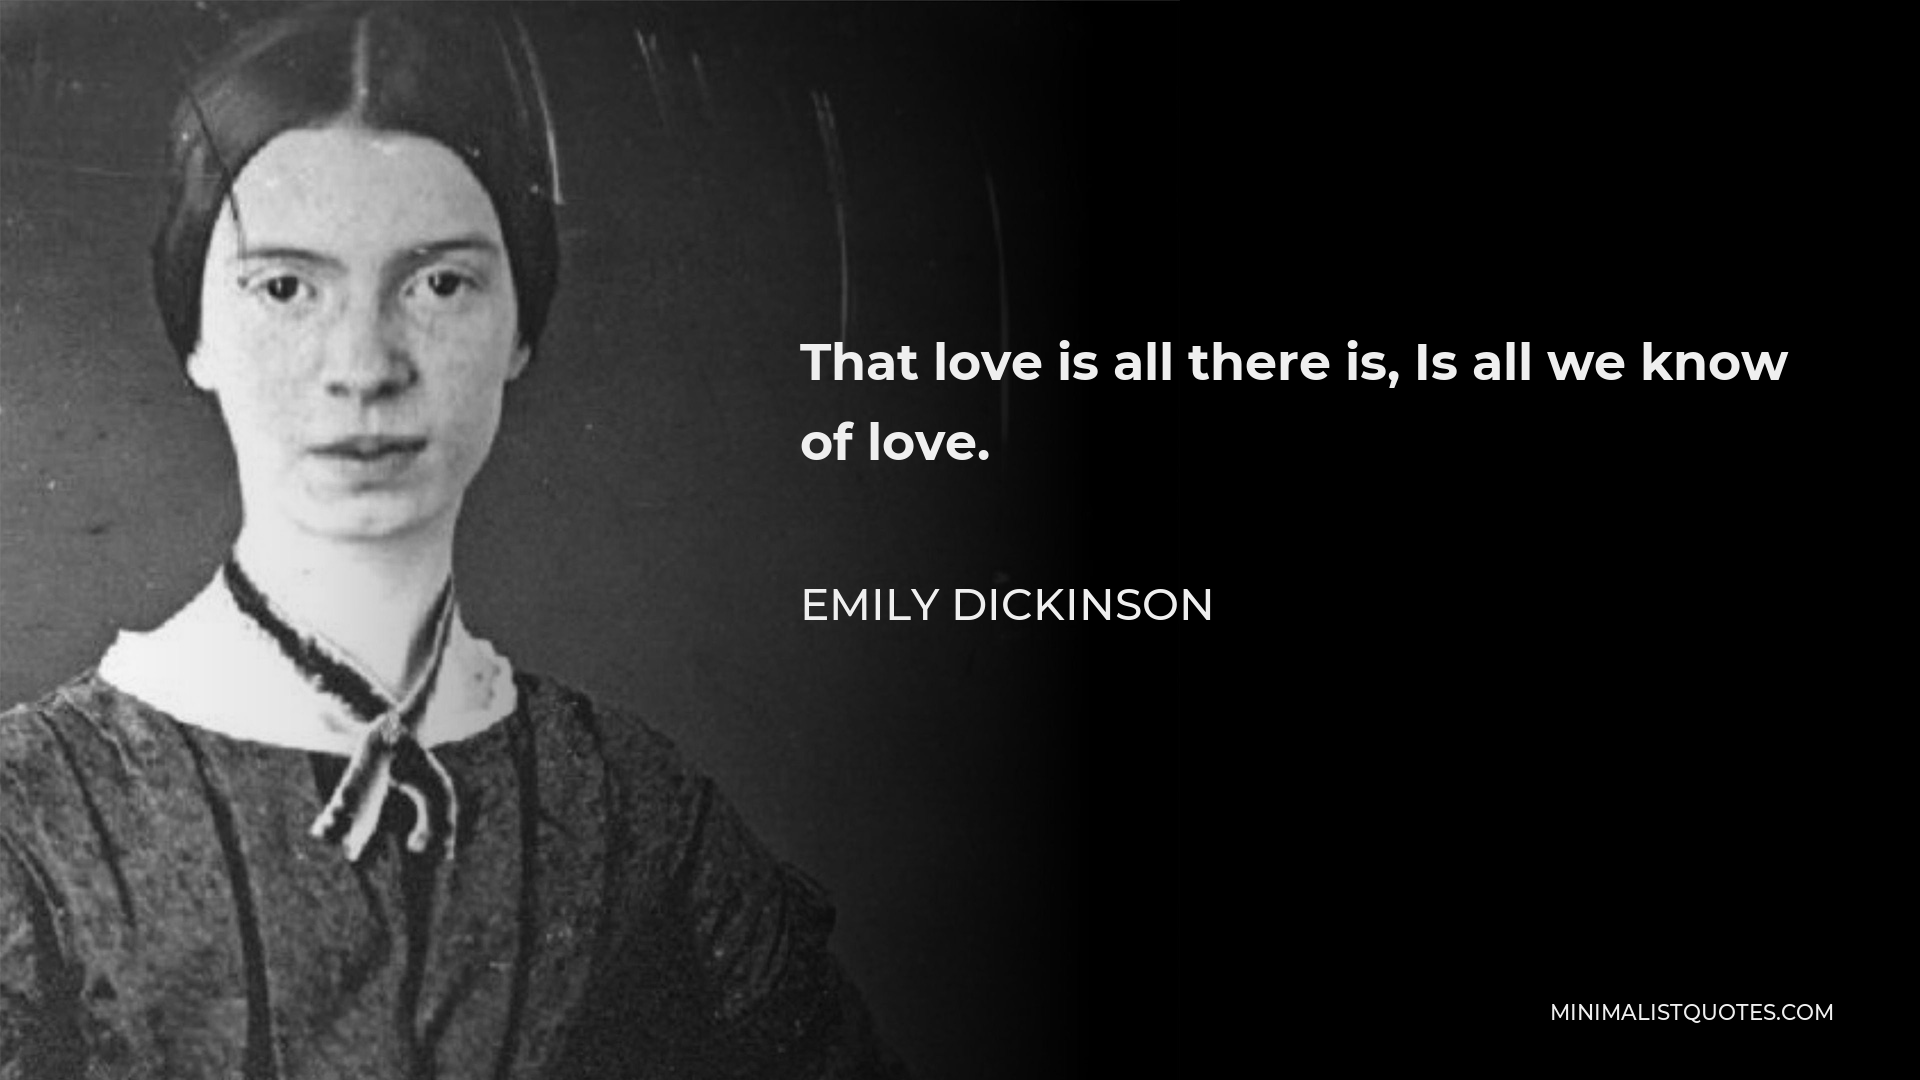 Emily Dickinson Quote - That love is all there is, Is all we know of love.